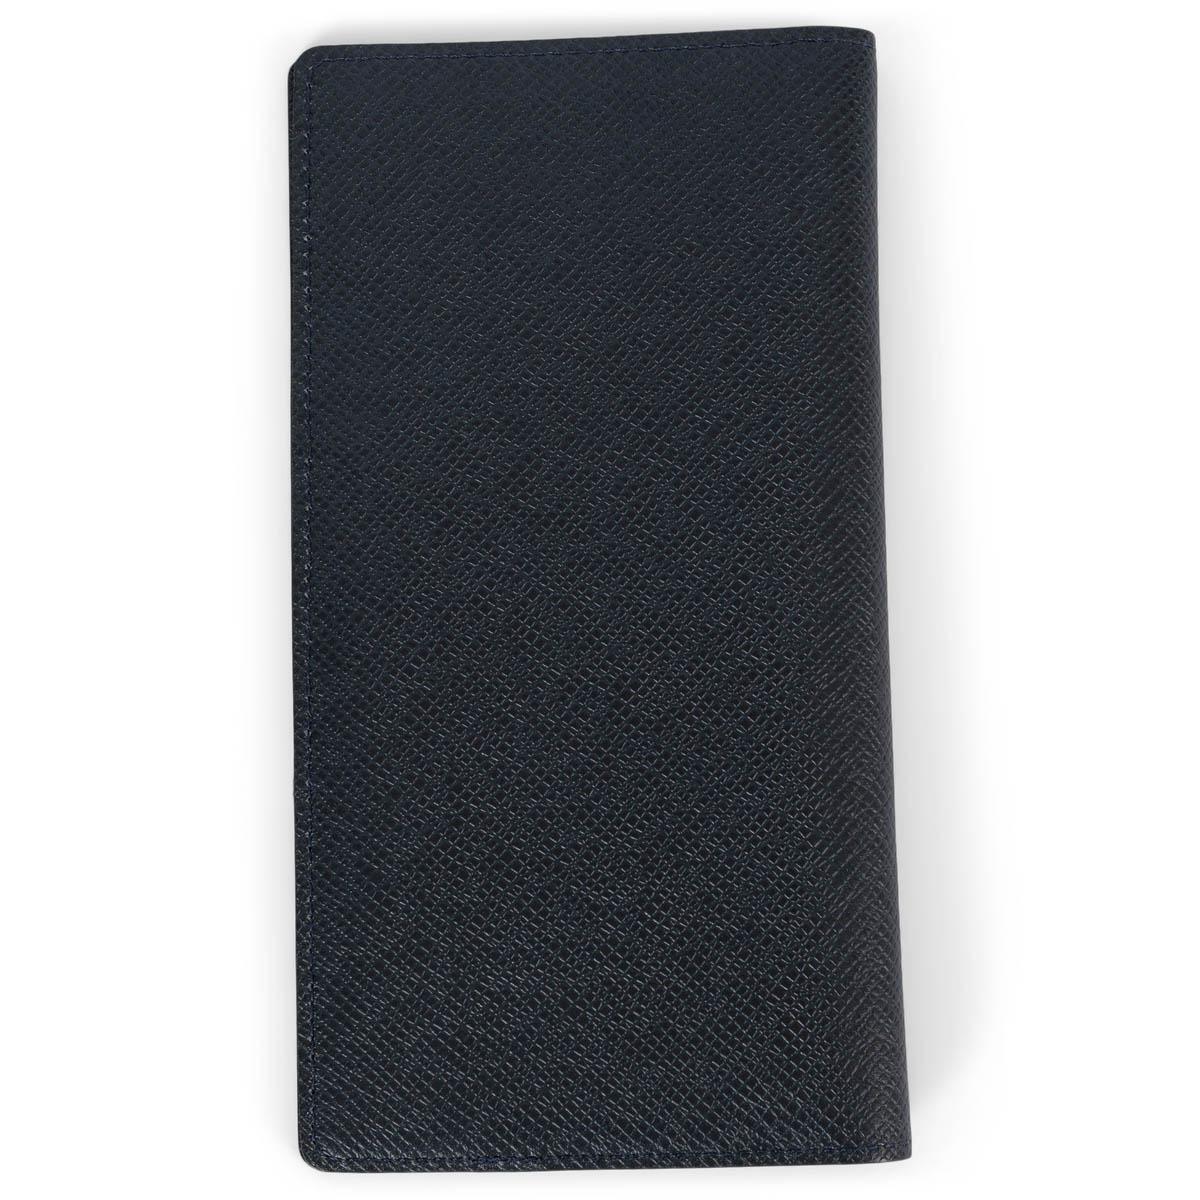 100% authentic Louis Vuitton Brazza Wallet in black Taïga leather range, Louis Vuitton's very first collection for men. The design features several different pockets, slots and compartments with discreetly stamped with the LV initials on the bottom.